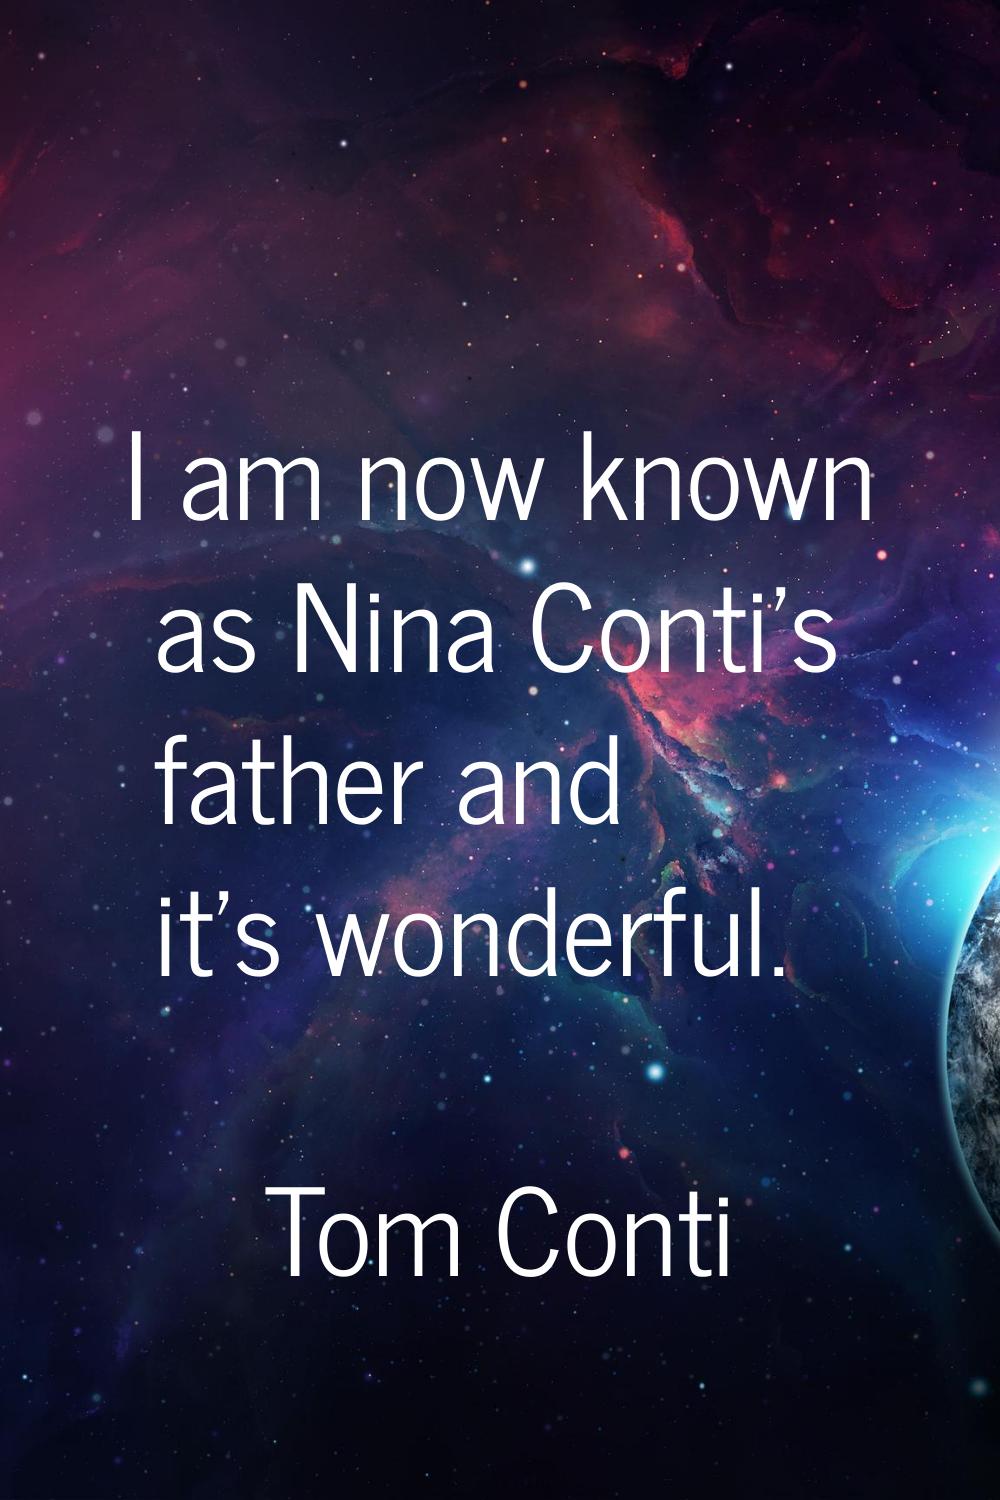 I am now known as Nina Conti's father and it's wonderful.